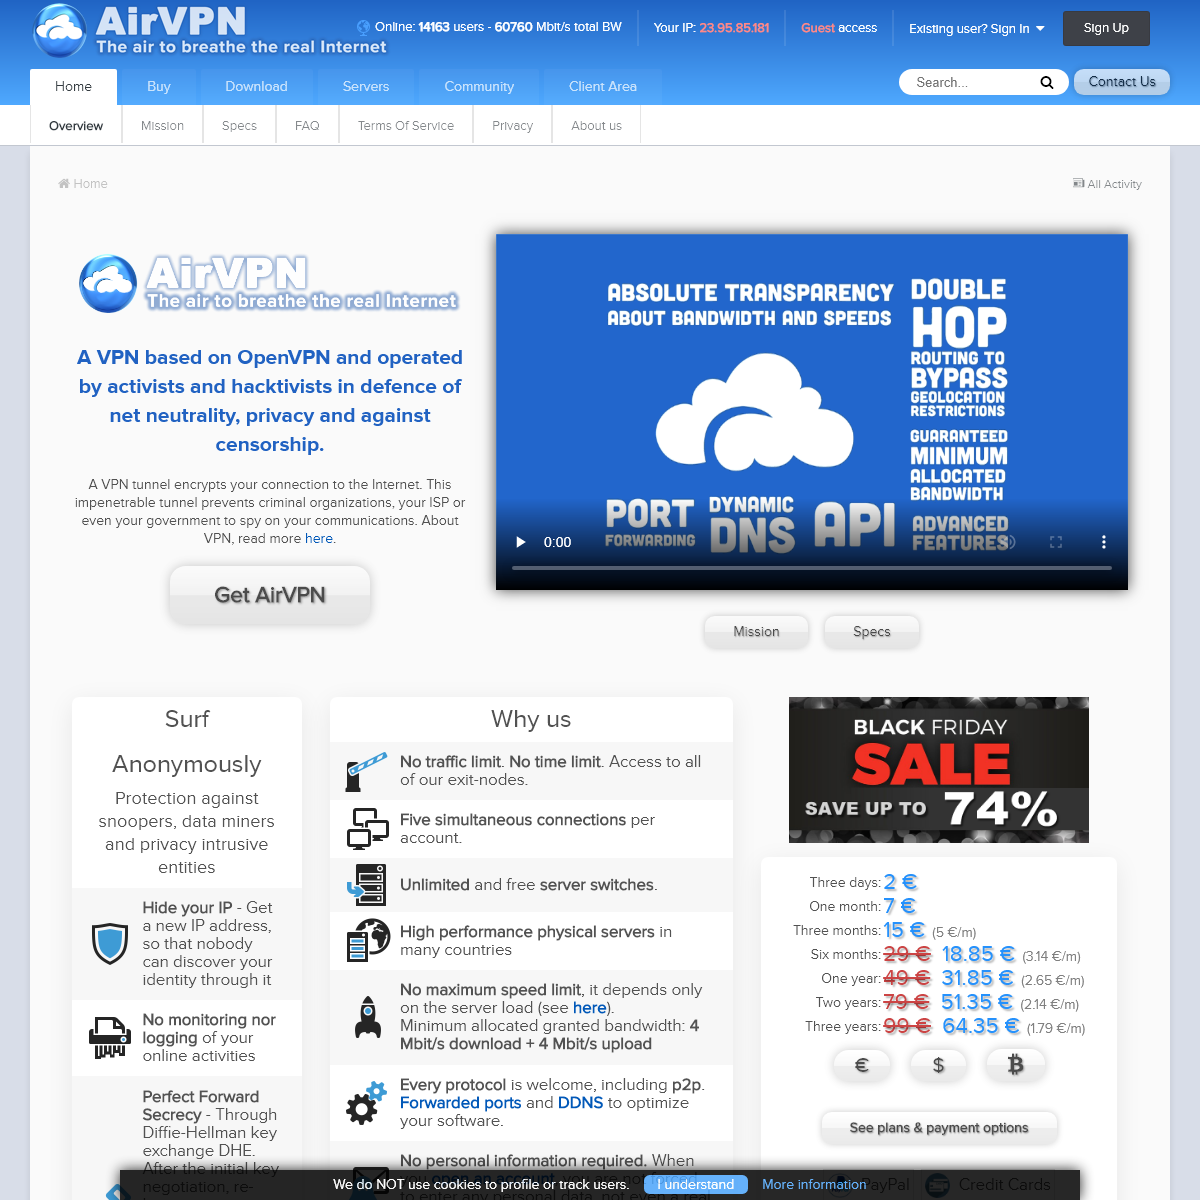 A complete backup of airvpn.org